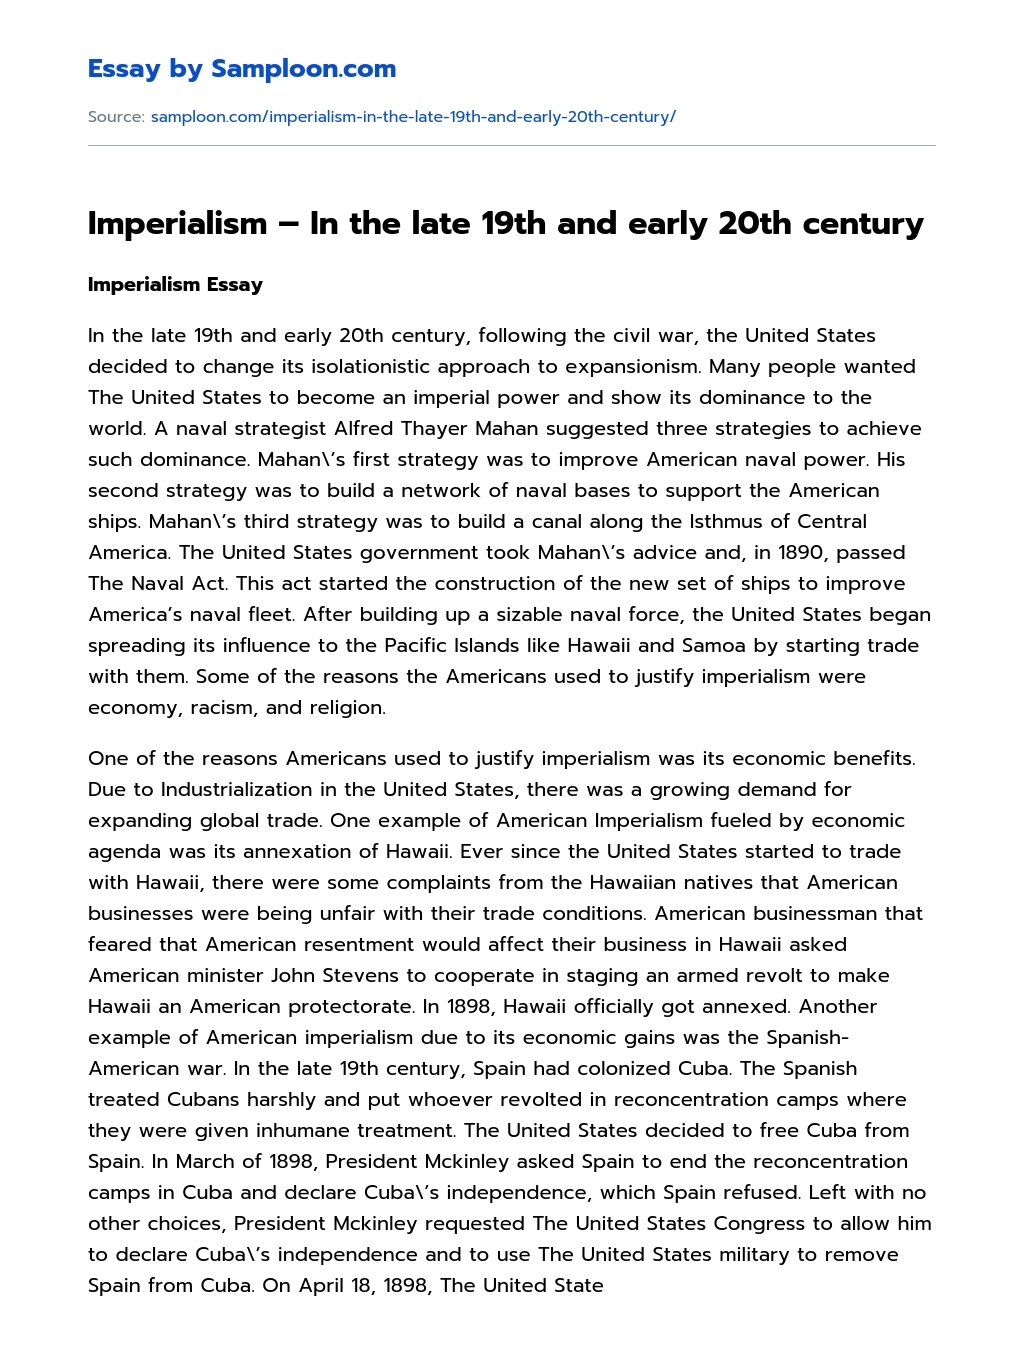 Imperialism – In the late 19th and early 20th century essay